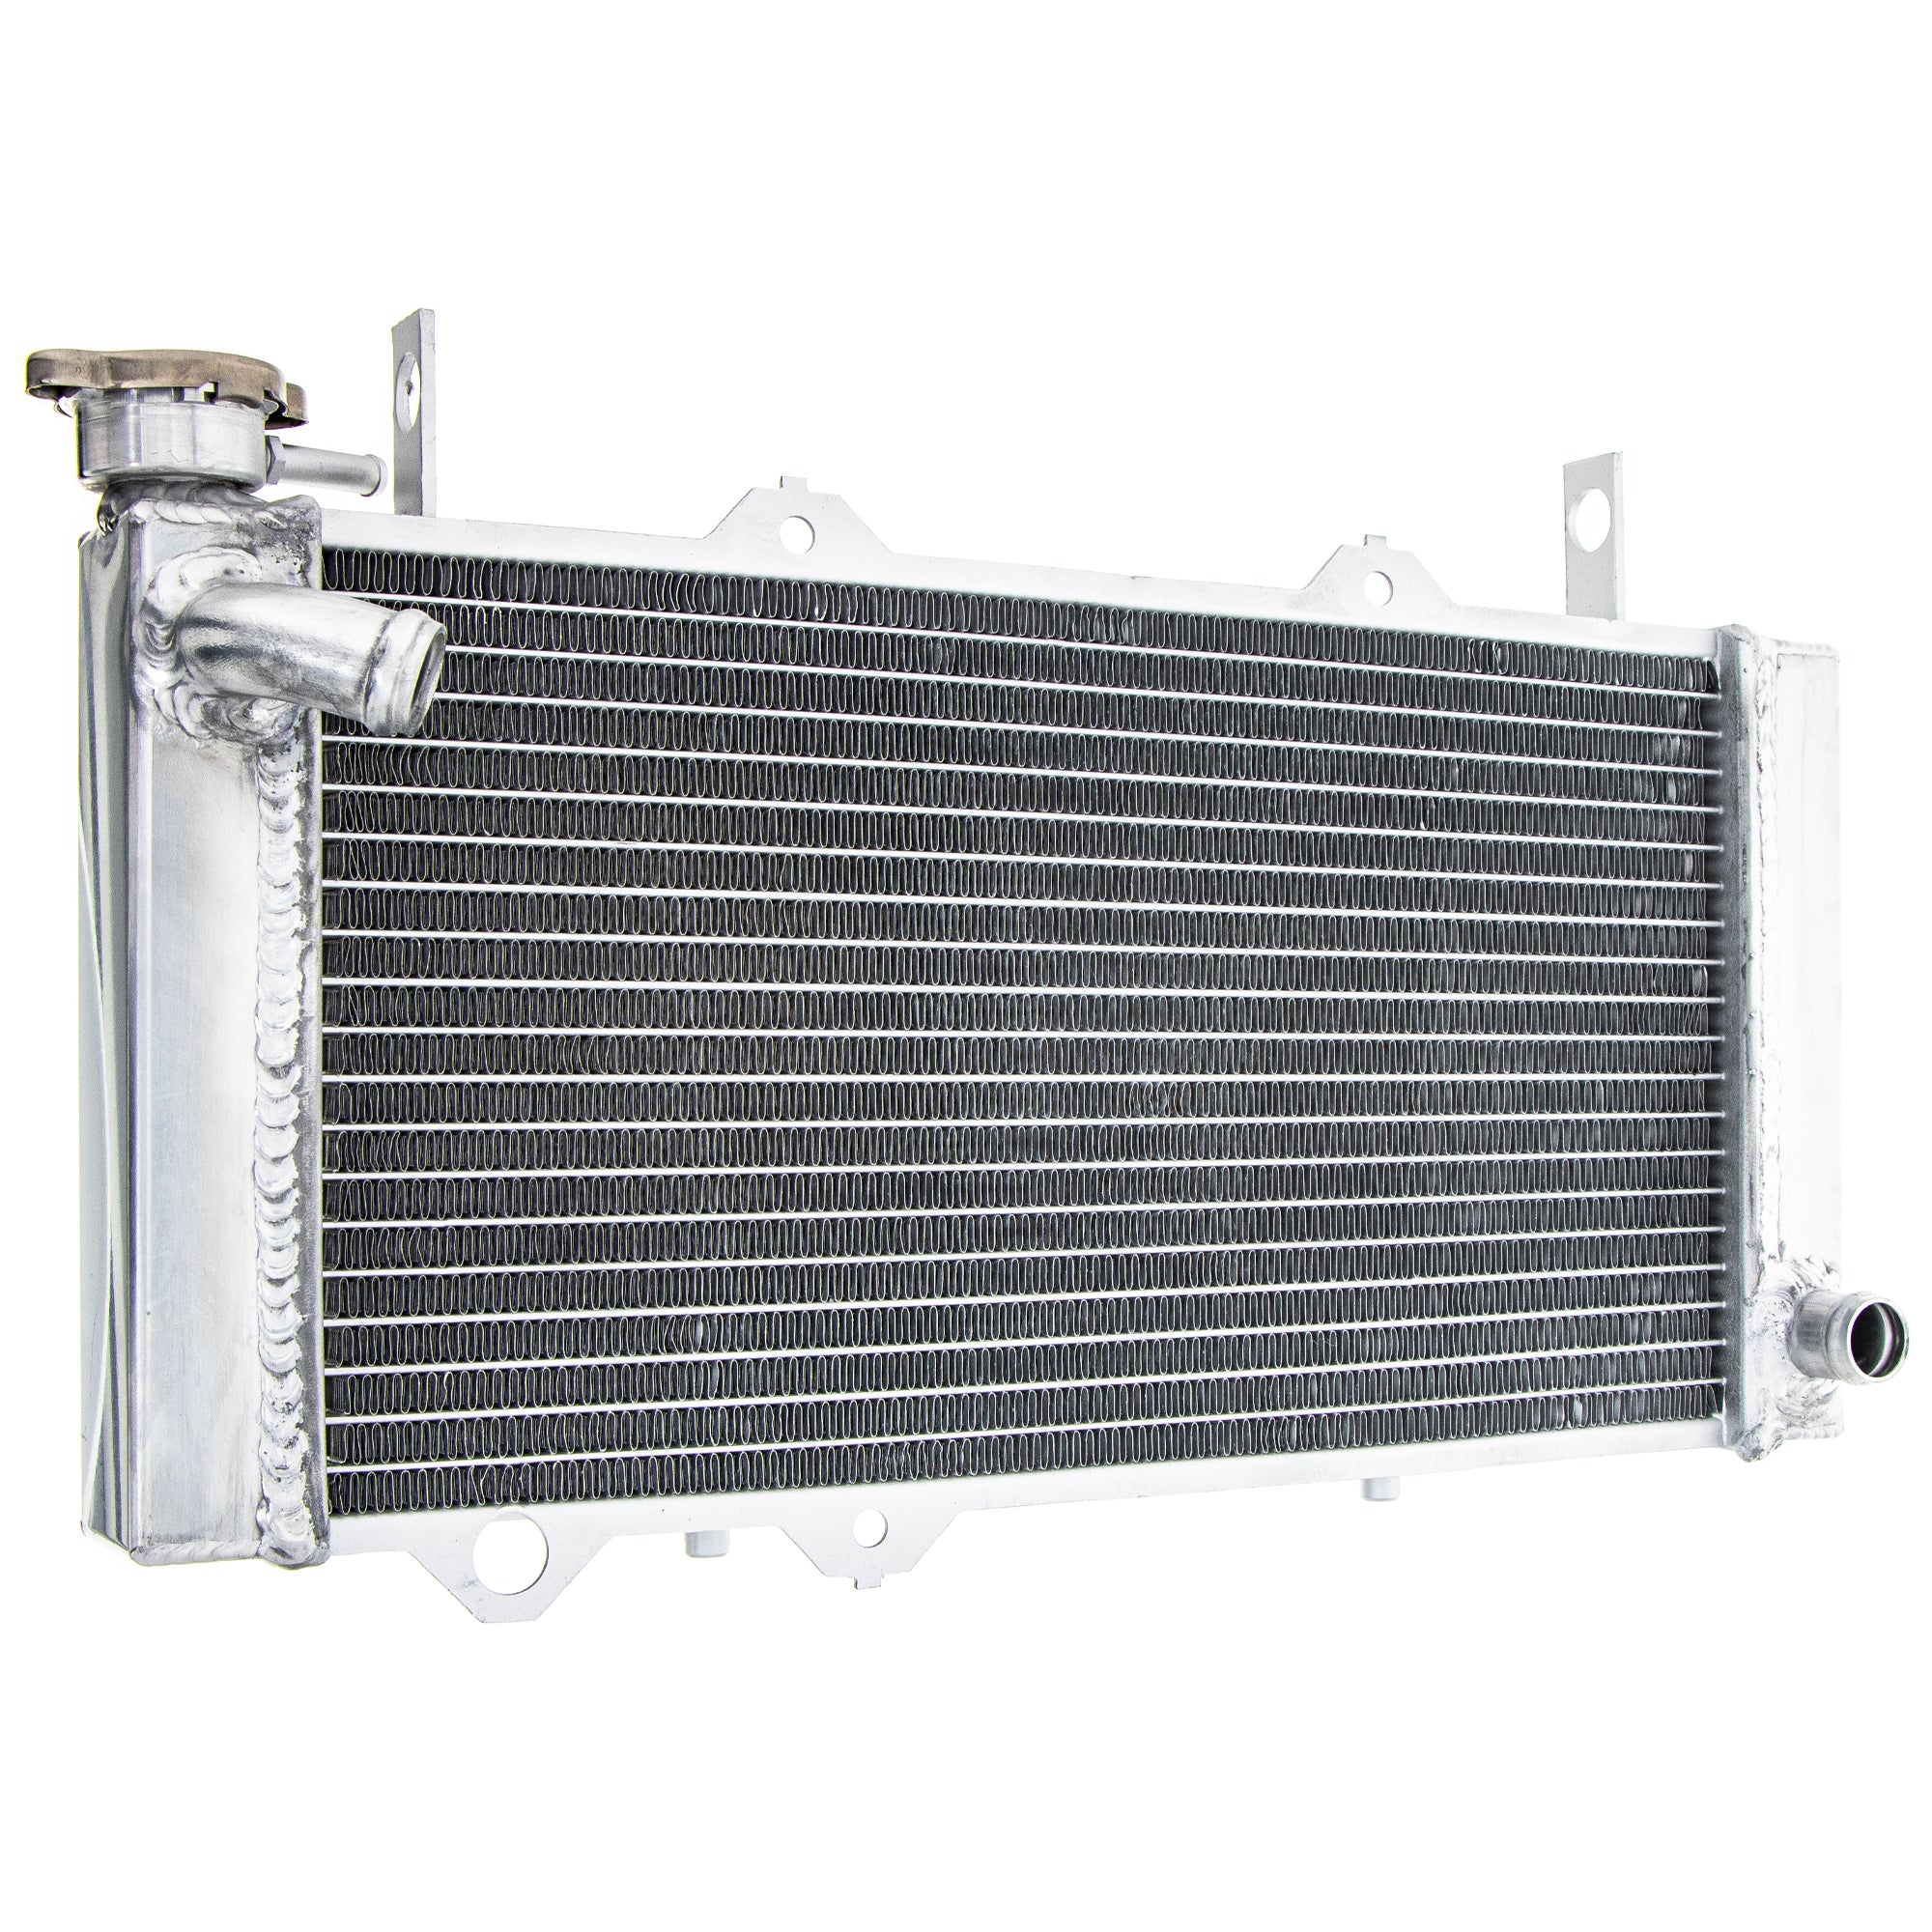 High Capacity Radiator for zOTHER TRX700 NICHE 519-CRD2254A